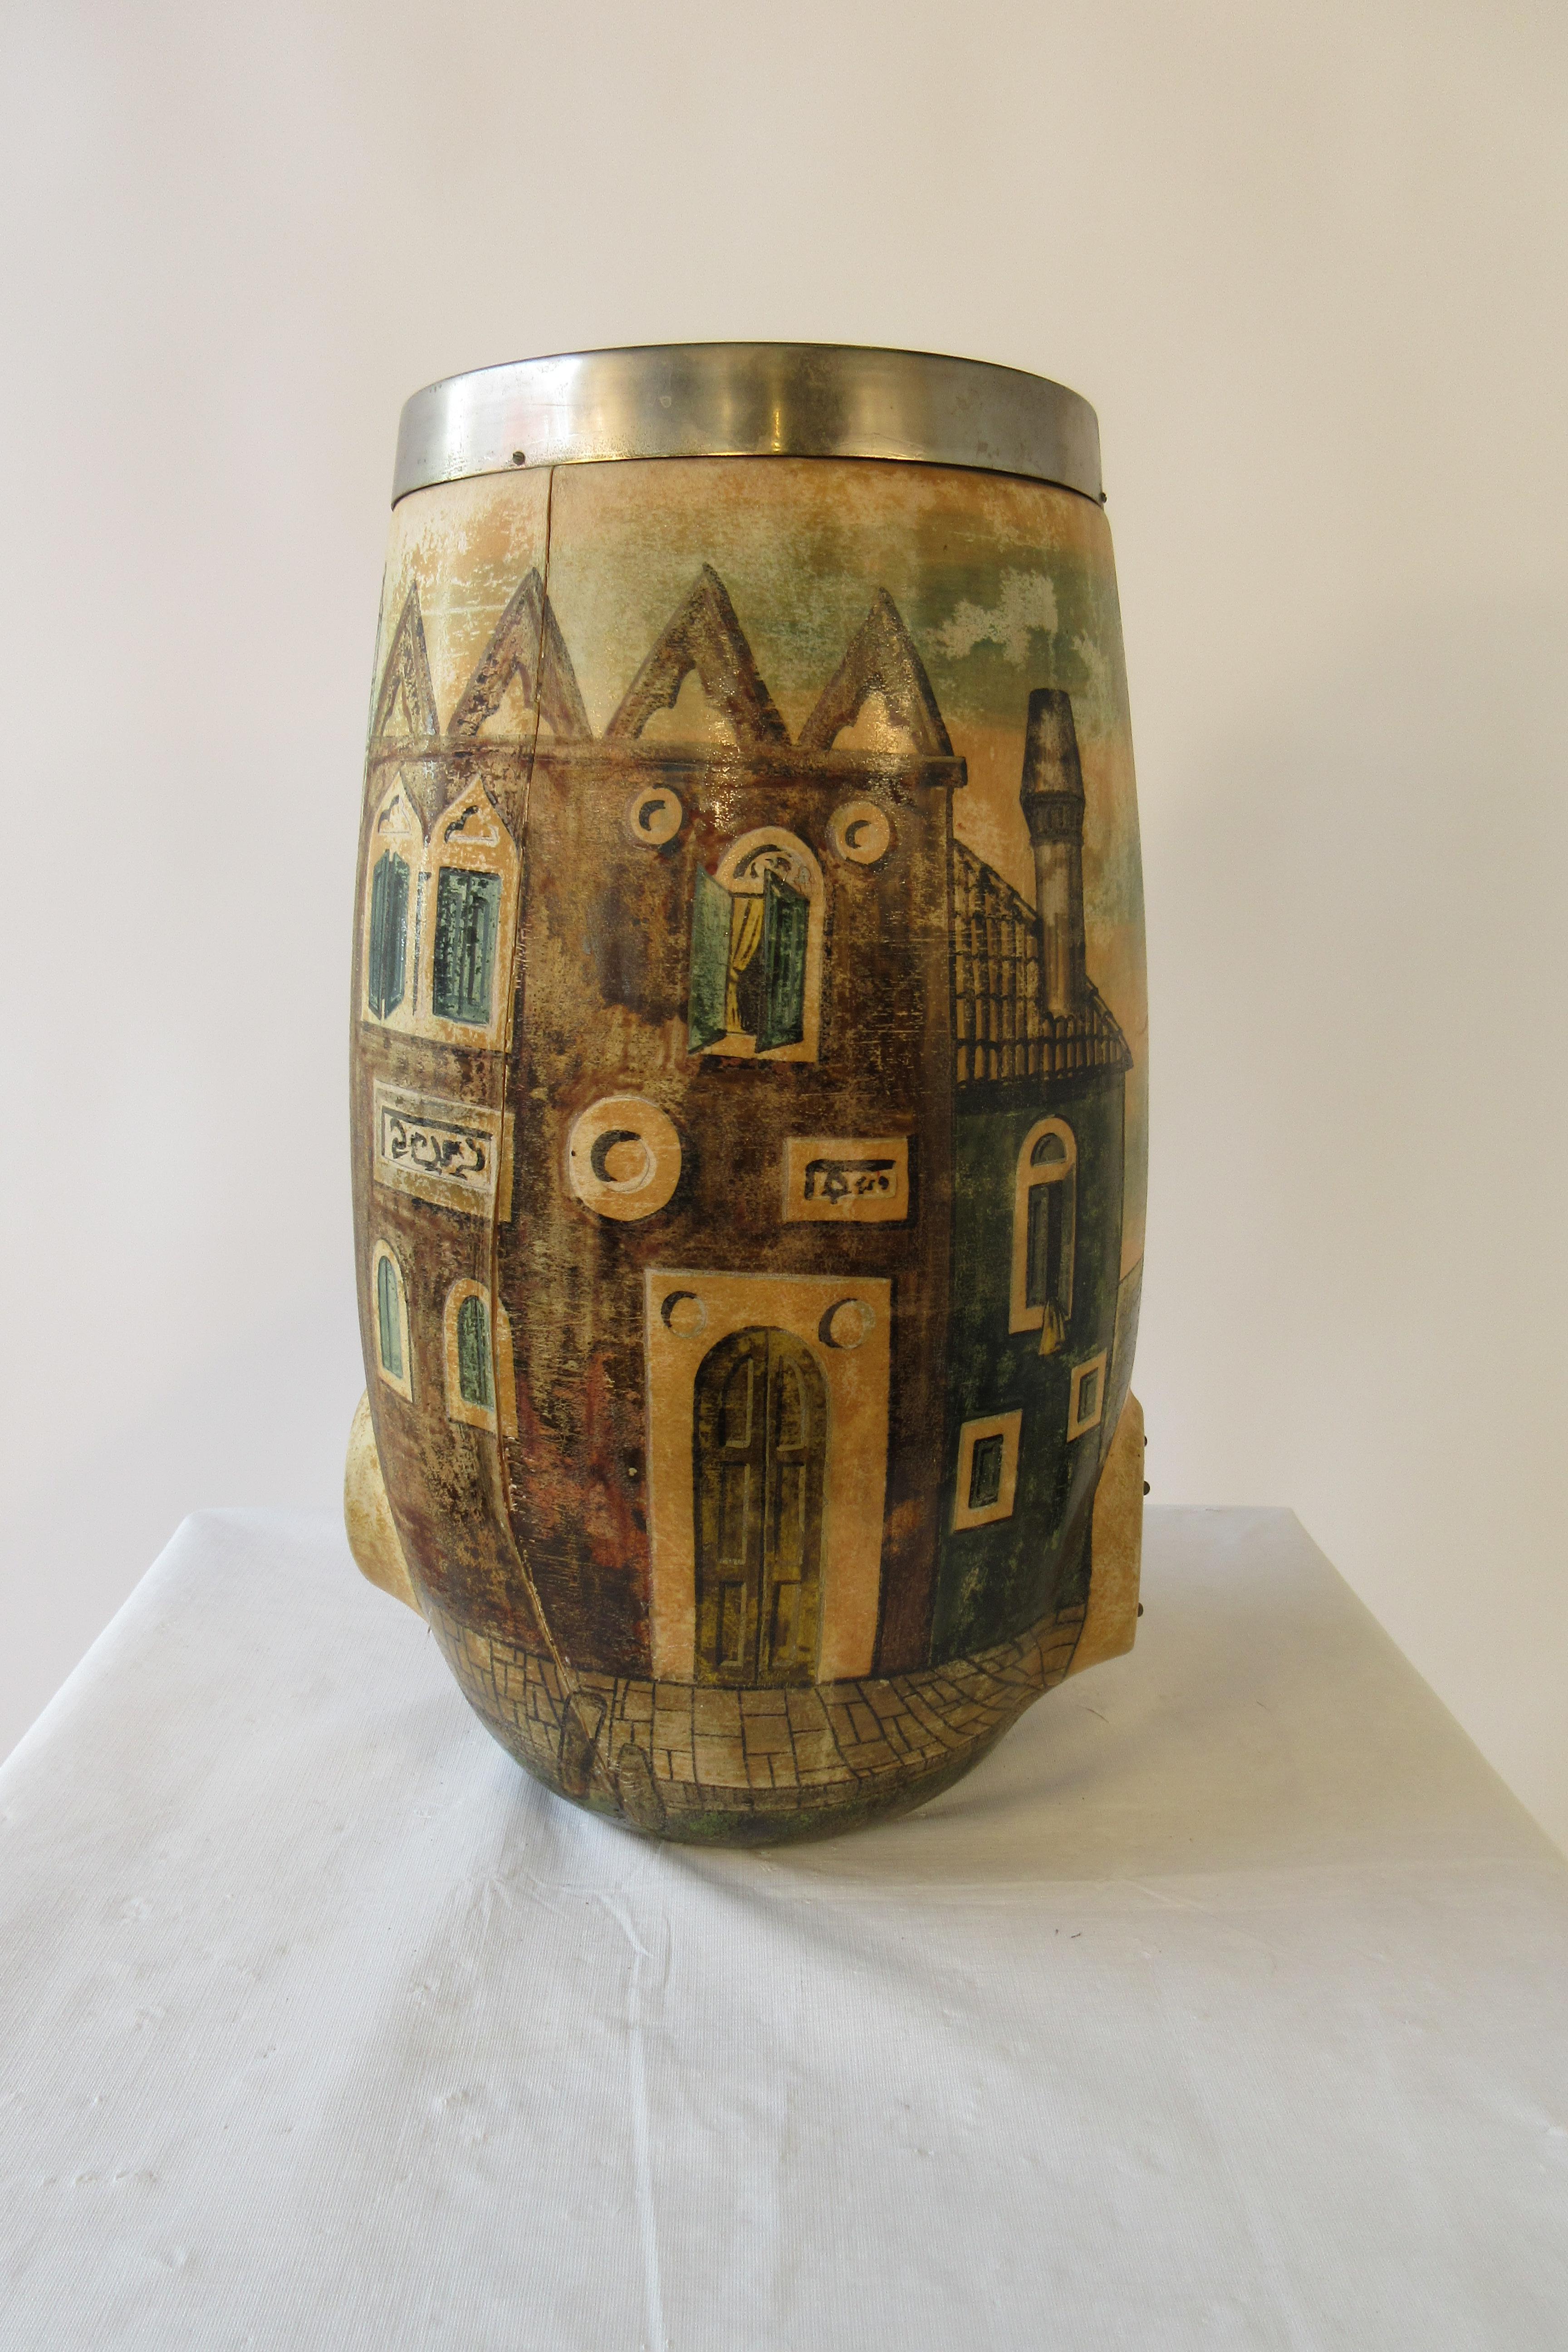 1950s painted wood umbrella stand. Village scene depicted.